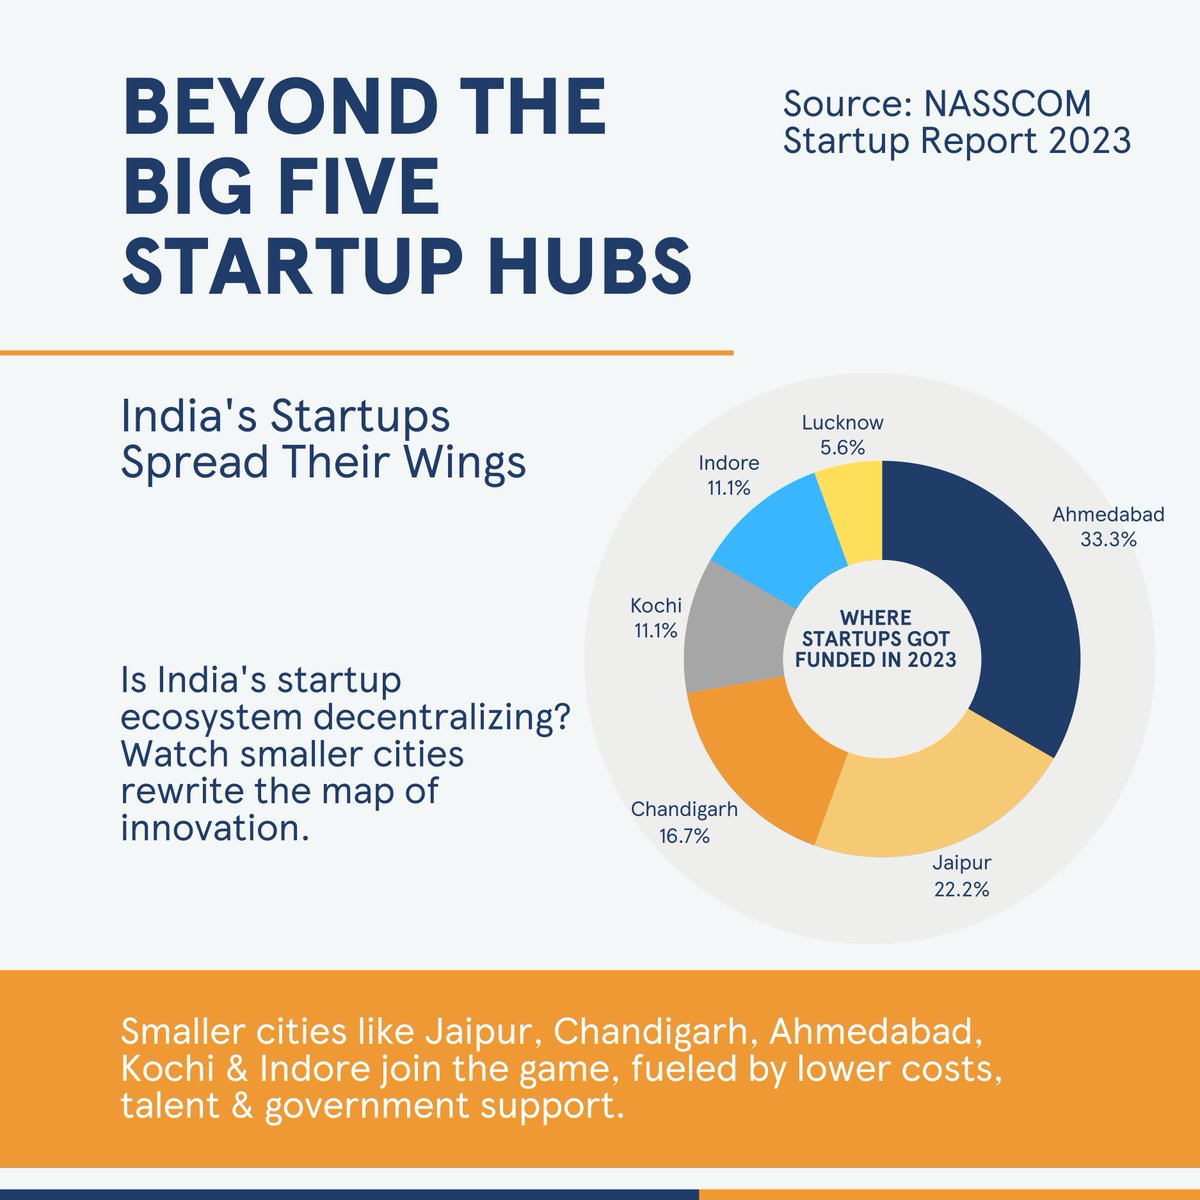 The #NASSCOM Startup Report 2023 shows a shift is brewing in cities like #Jaipur, #Ahmedabad, #Chandigarh, #Kochi, and #Indore. Lower costs, talent, and #governmentsupport are fostering #regionalinnovation and diversity. 

#StartupsIndia #BeyondTheHubs #InnovationForAll